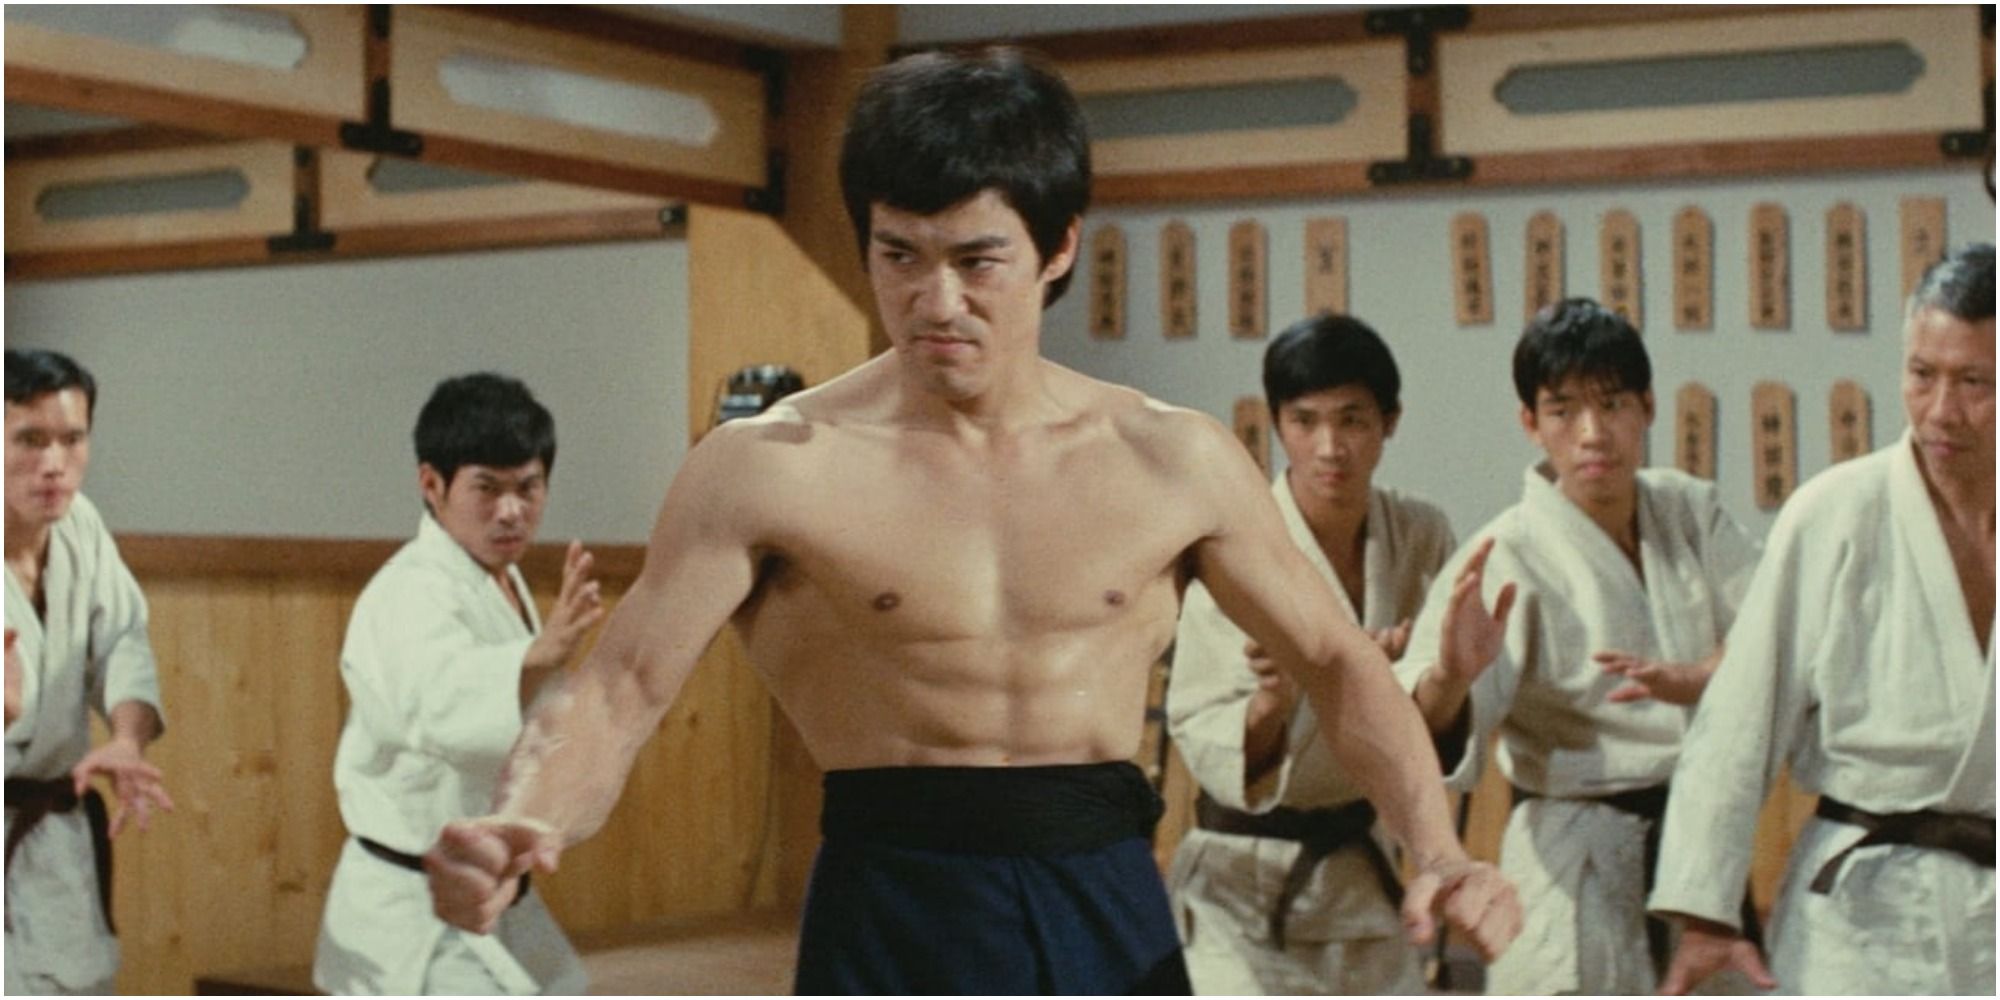 Bruce Lee surrounded in a Karate dojo in Fist of Fury